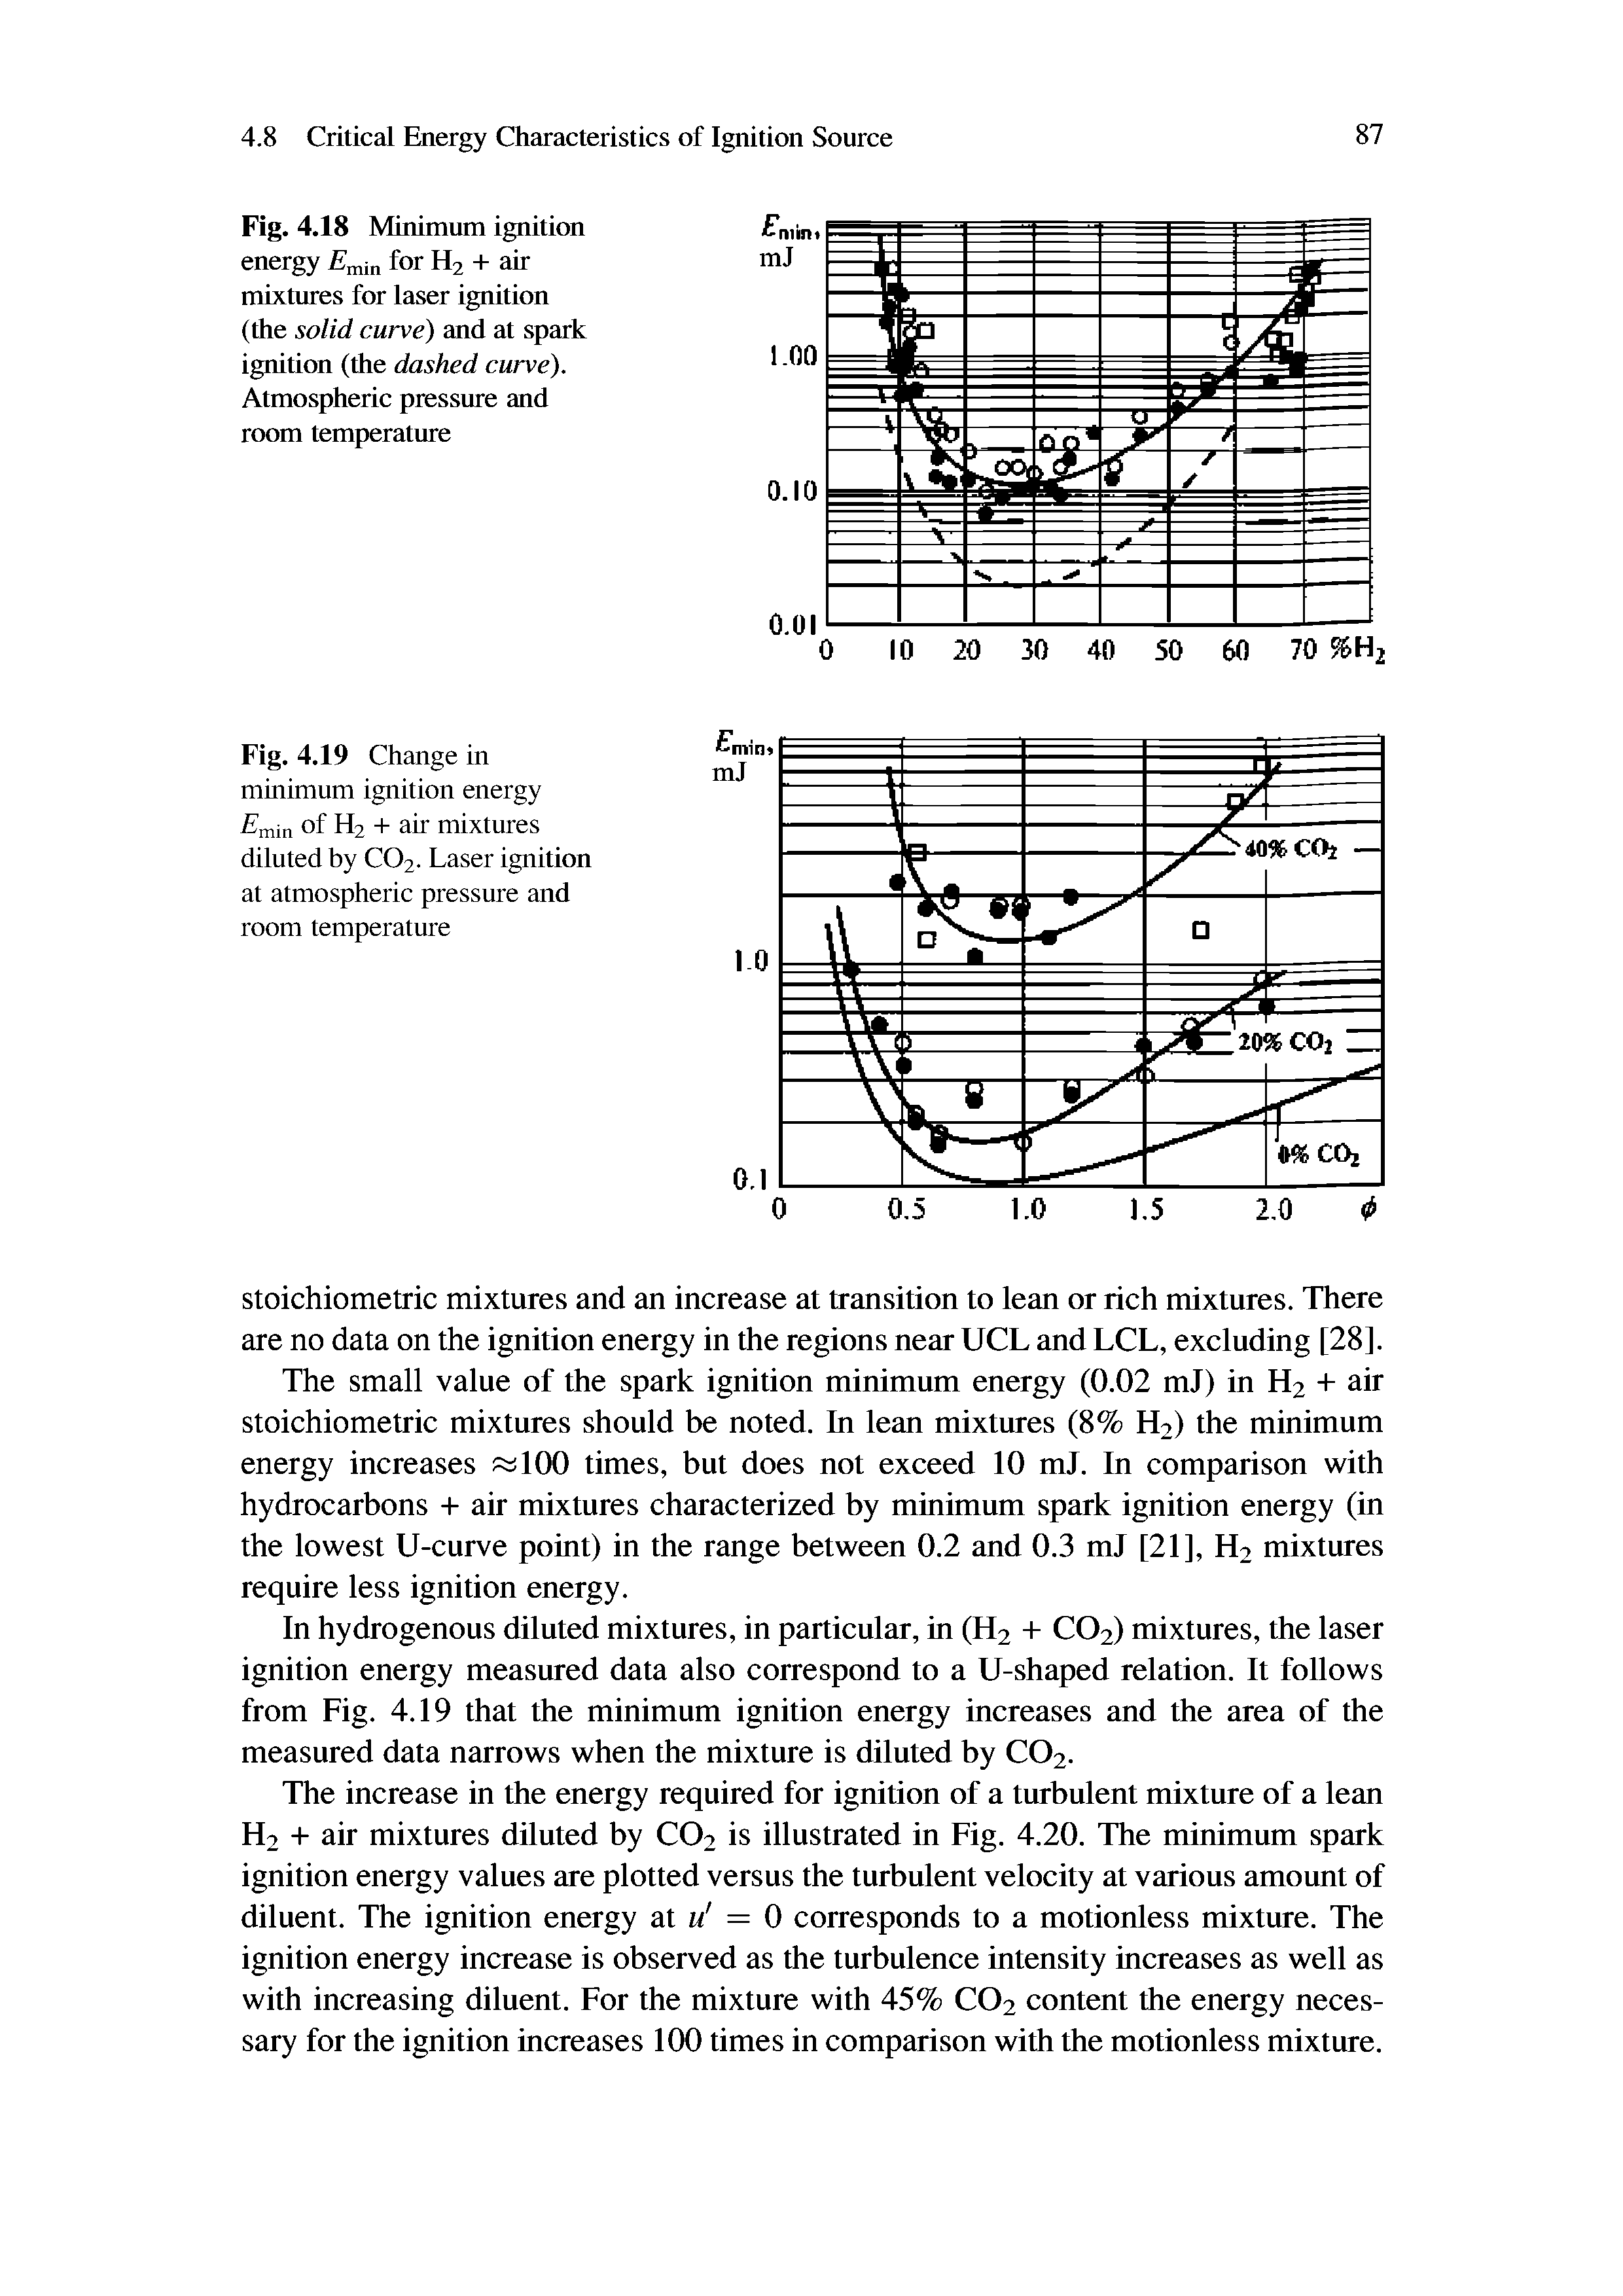 Fig. 4.18 Minimum ignition energy for H2 + air mixtures for laser ignition (the solid curve) and at spark ignition (the dashed curve). Atmospheric pressure and room temperature...